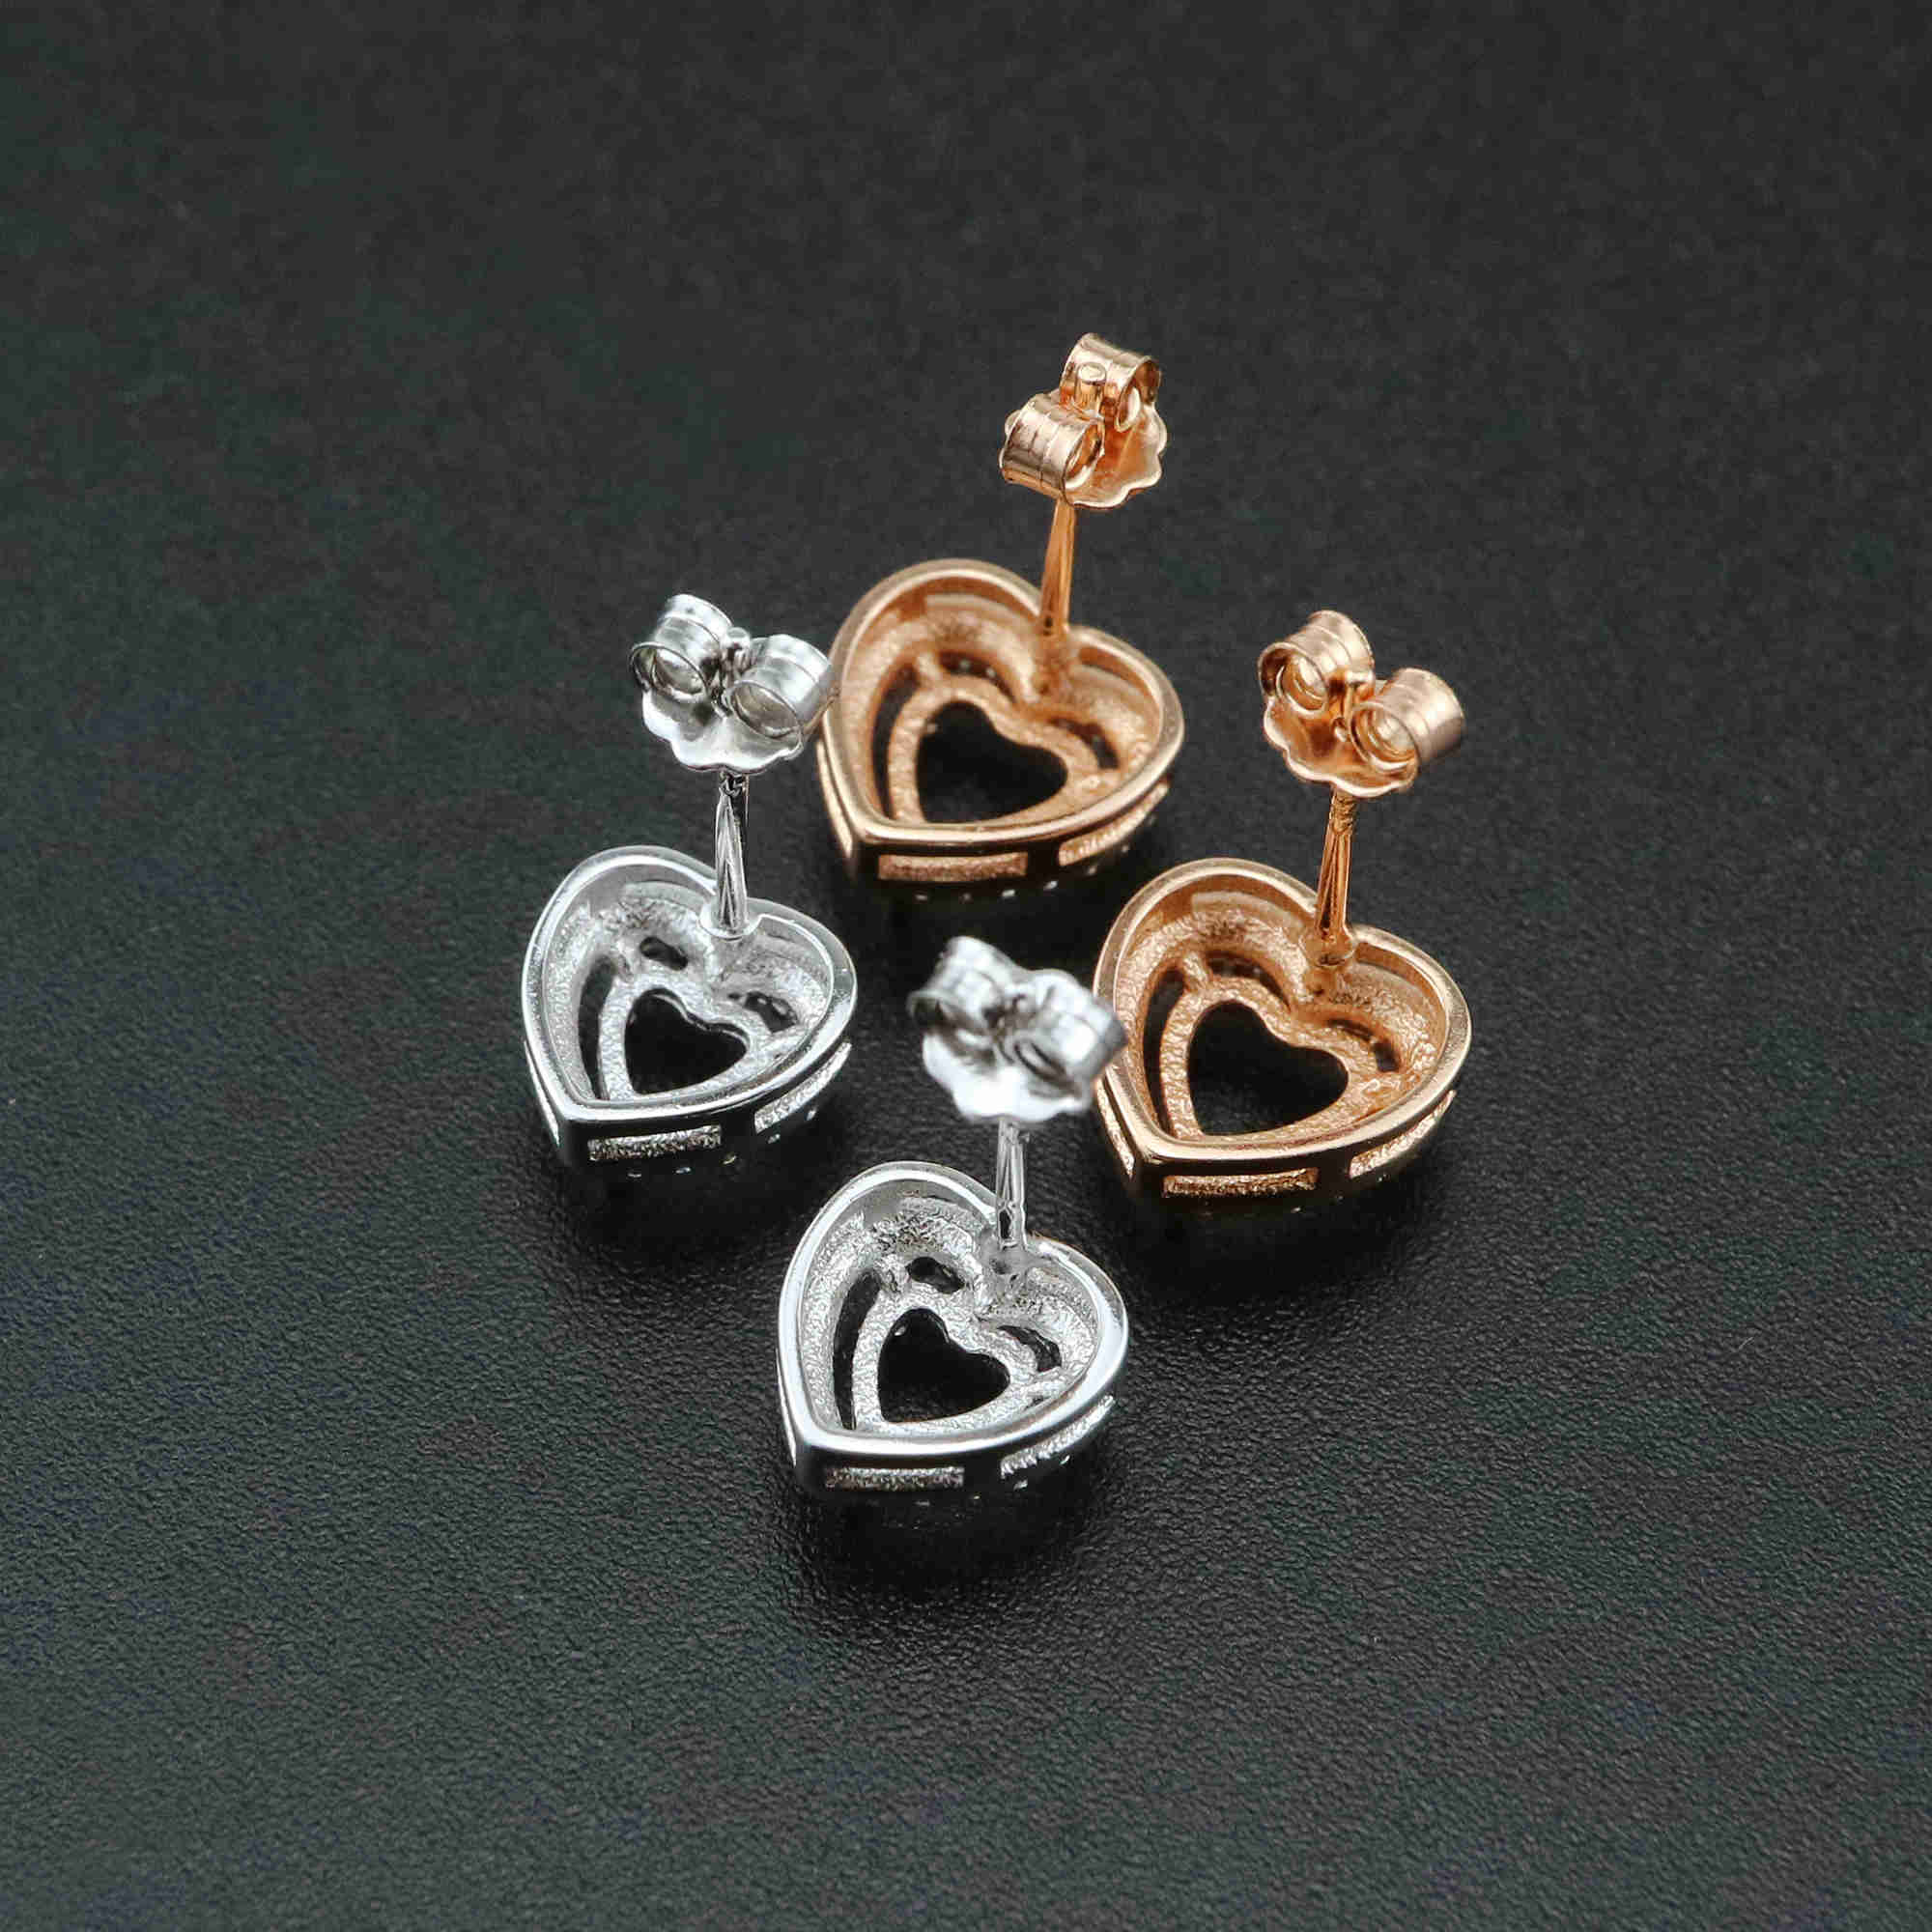 1Pair 5-6MM Rose Gold Plated Solid 925 Sterling Silver Heart Prong Bezel DIY Studs Earrings Settings for Gemstone Jewelry Supplies 1706051 - Click Image to Close